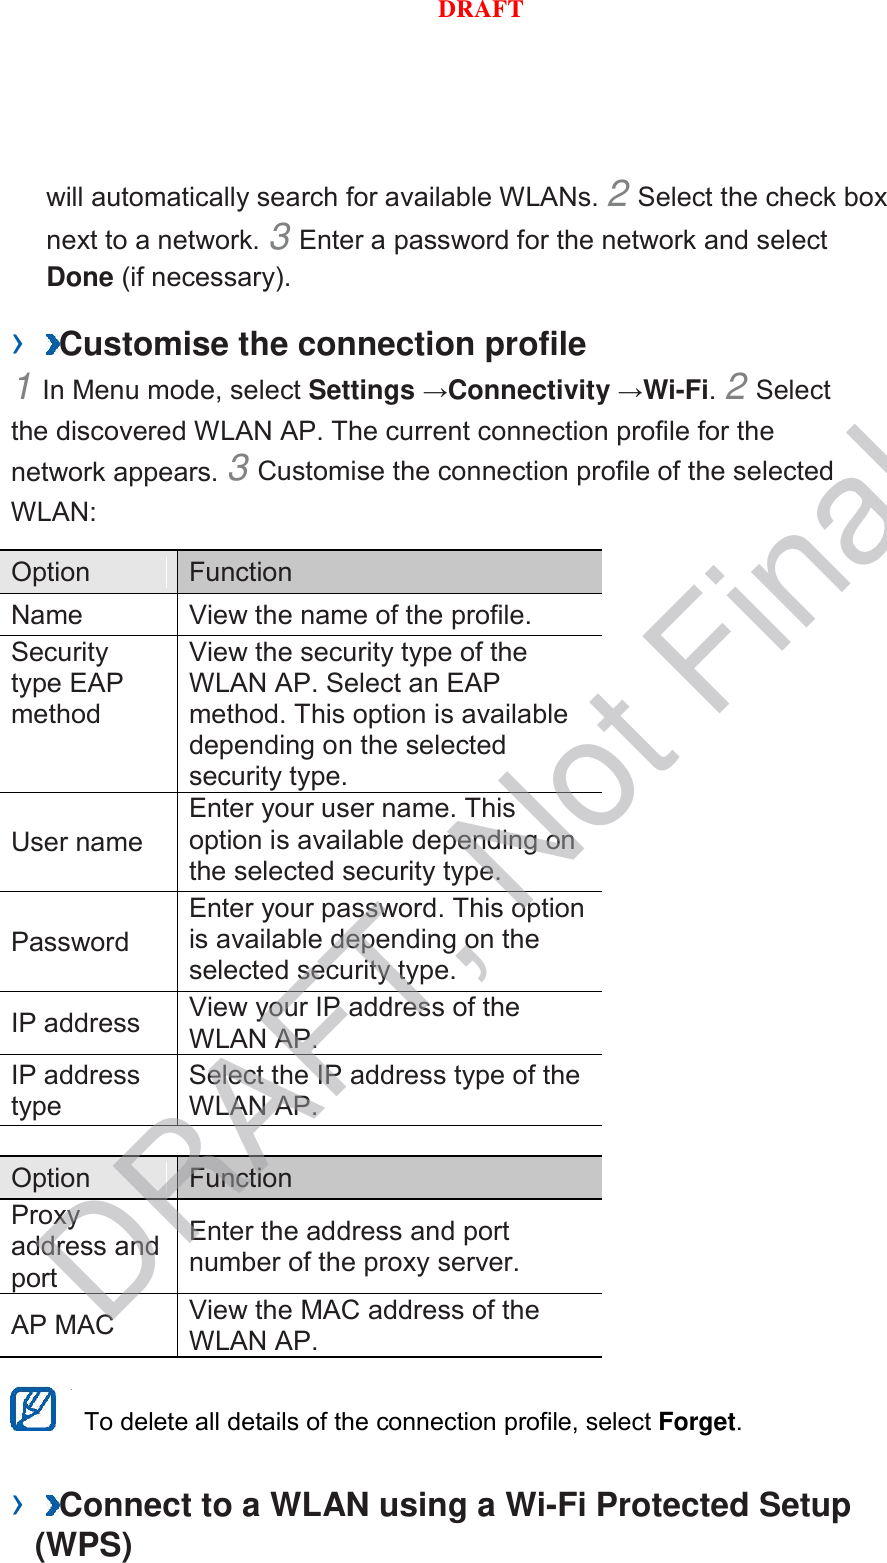 will automatically search for available WLANs. 2 Select the check box next to a network. 3 Enter a password for the network and select Done (if necessary).   ›  Customise the connection profile   1 In Menu mode, select Settings →Connectivity →Wi-Fi. 2 Select the discovered WLAN AP. The current connection profile for the network appears. 3 Customise the connection profile of the selected WLAN:   Option    Function   Name   View the name of the profile.   Security type EAP method   View the security type of the WLAN AP. Select an EAP method. This option is available depending on the selected security type.   User name   Enter your user name. This option is available depending on the selected security type.   Password   Enter your password. This option is available depending on the selected security type.   IP address   View your IP address of the WLAN AP.   IP address type   Select the IP address type of the WLAN AP.    Option    Function   Proxy address and port   Enter the address and port number of the proxy server.   AP MAC   View the MAC address of the WLAN AP.     To delete all details of the connection profile, select Forget.   ›  Connect to a WLAN using a Wi-Fi Protected Setup (WPS)   DRAFT, Not FinalDRAFT